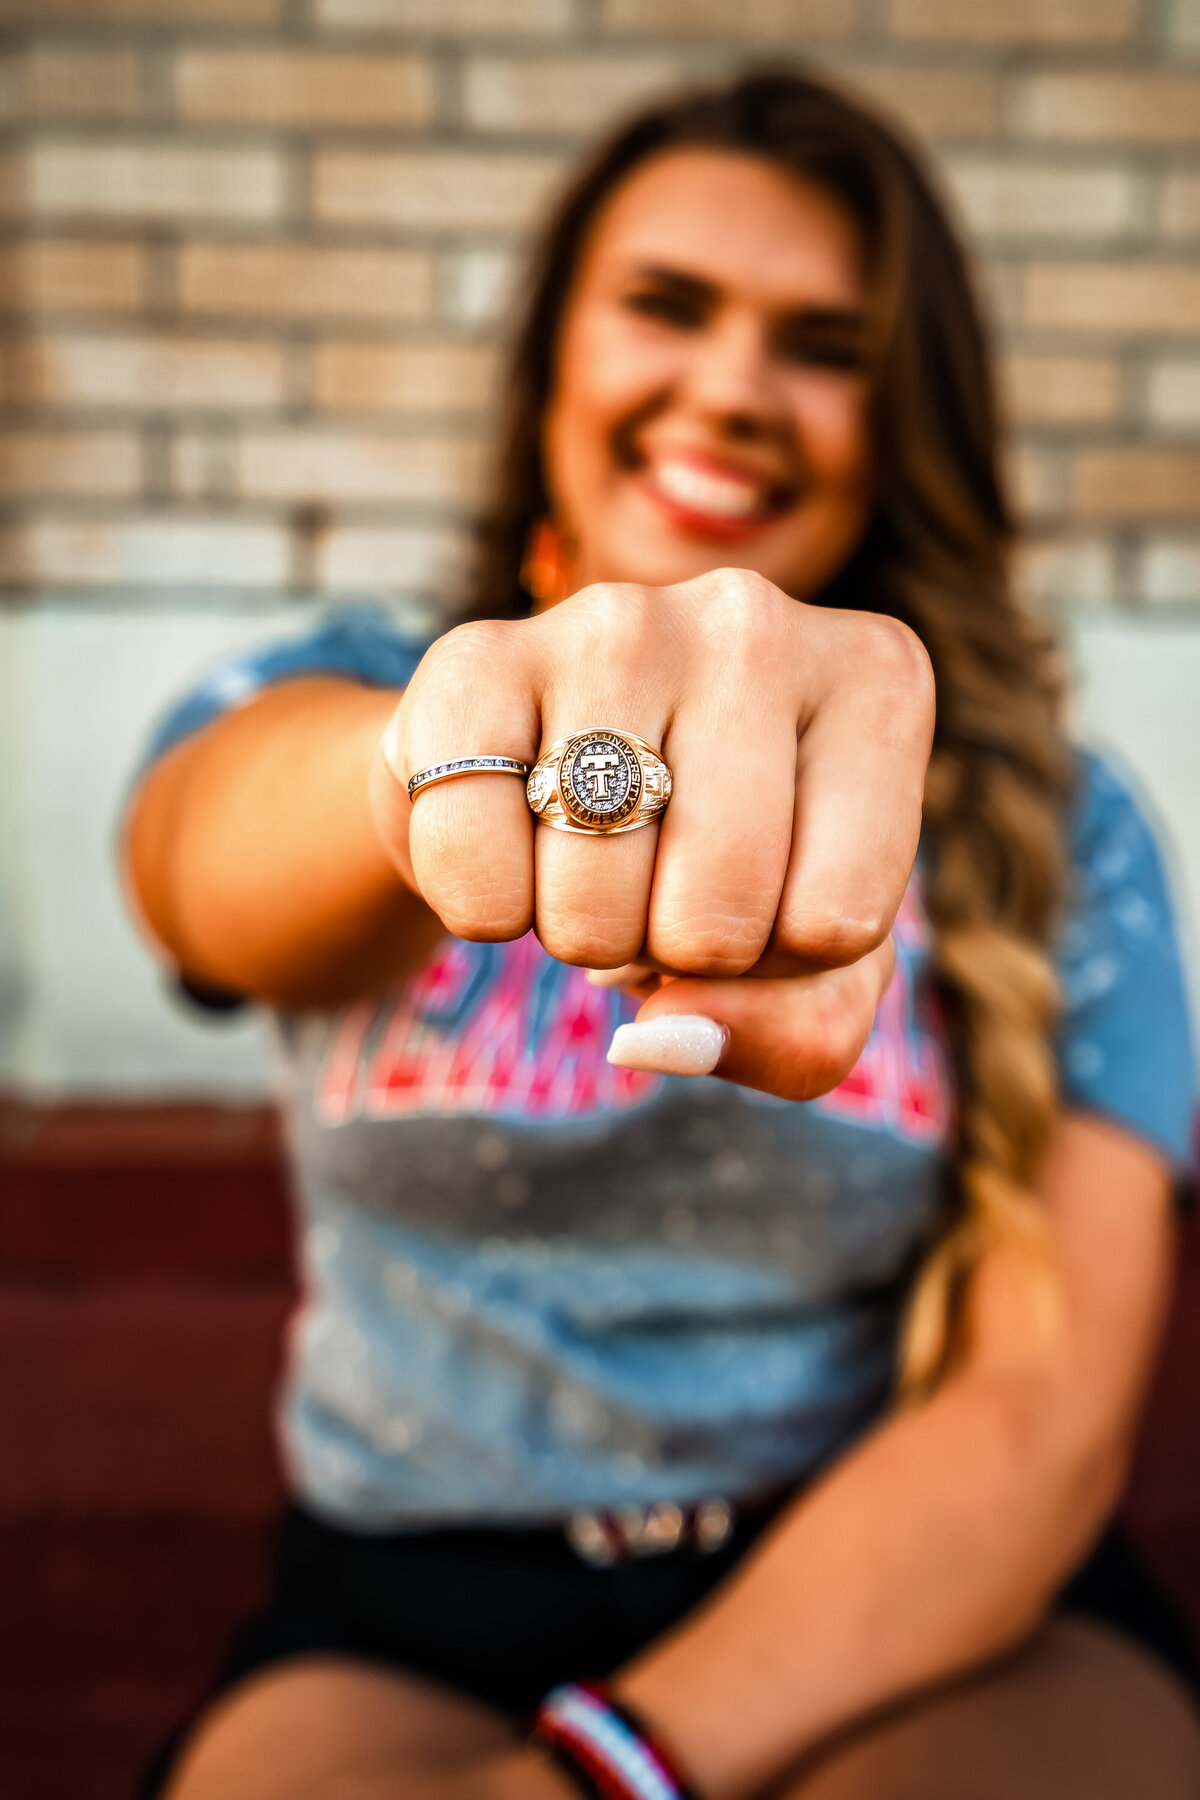 College senior showing class ring